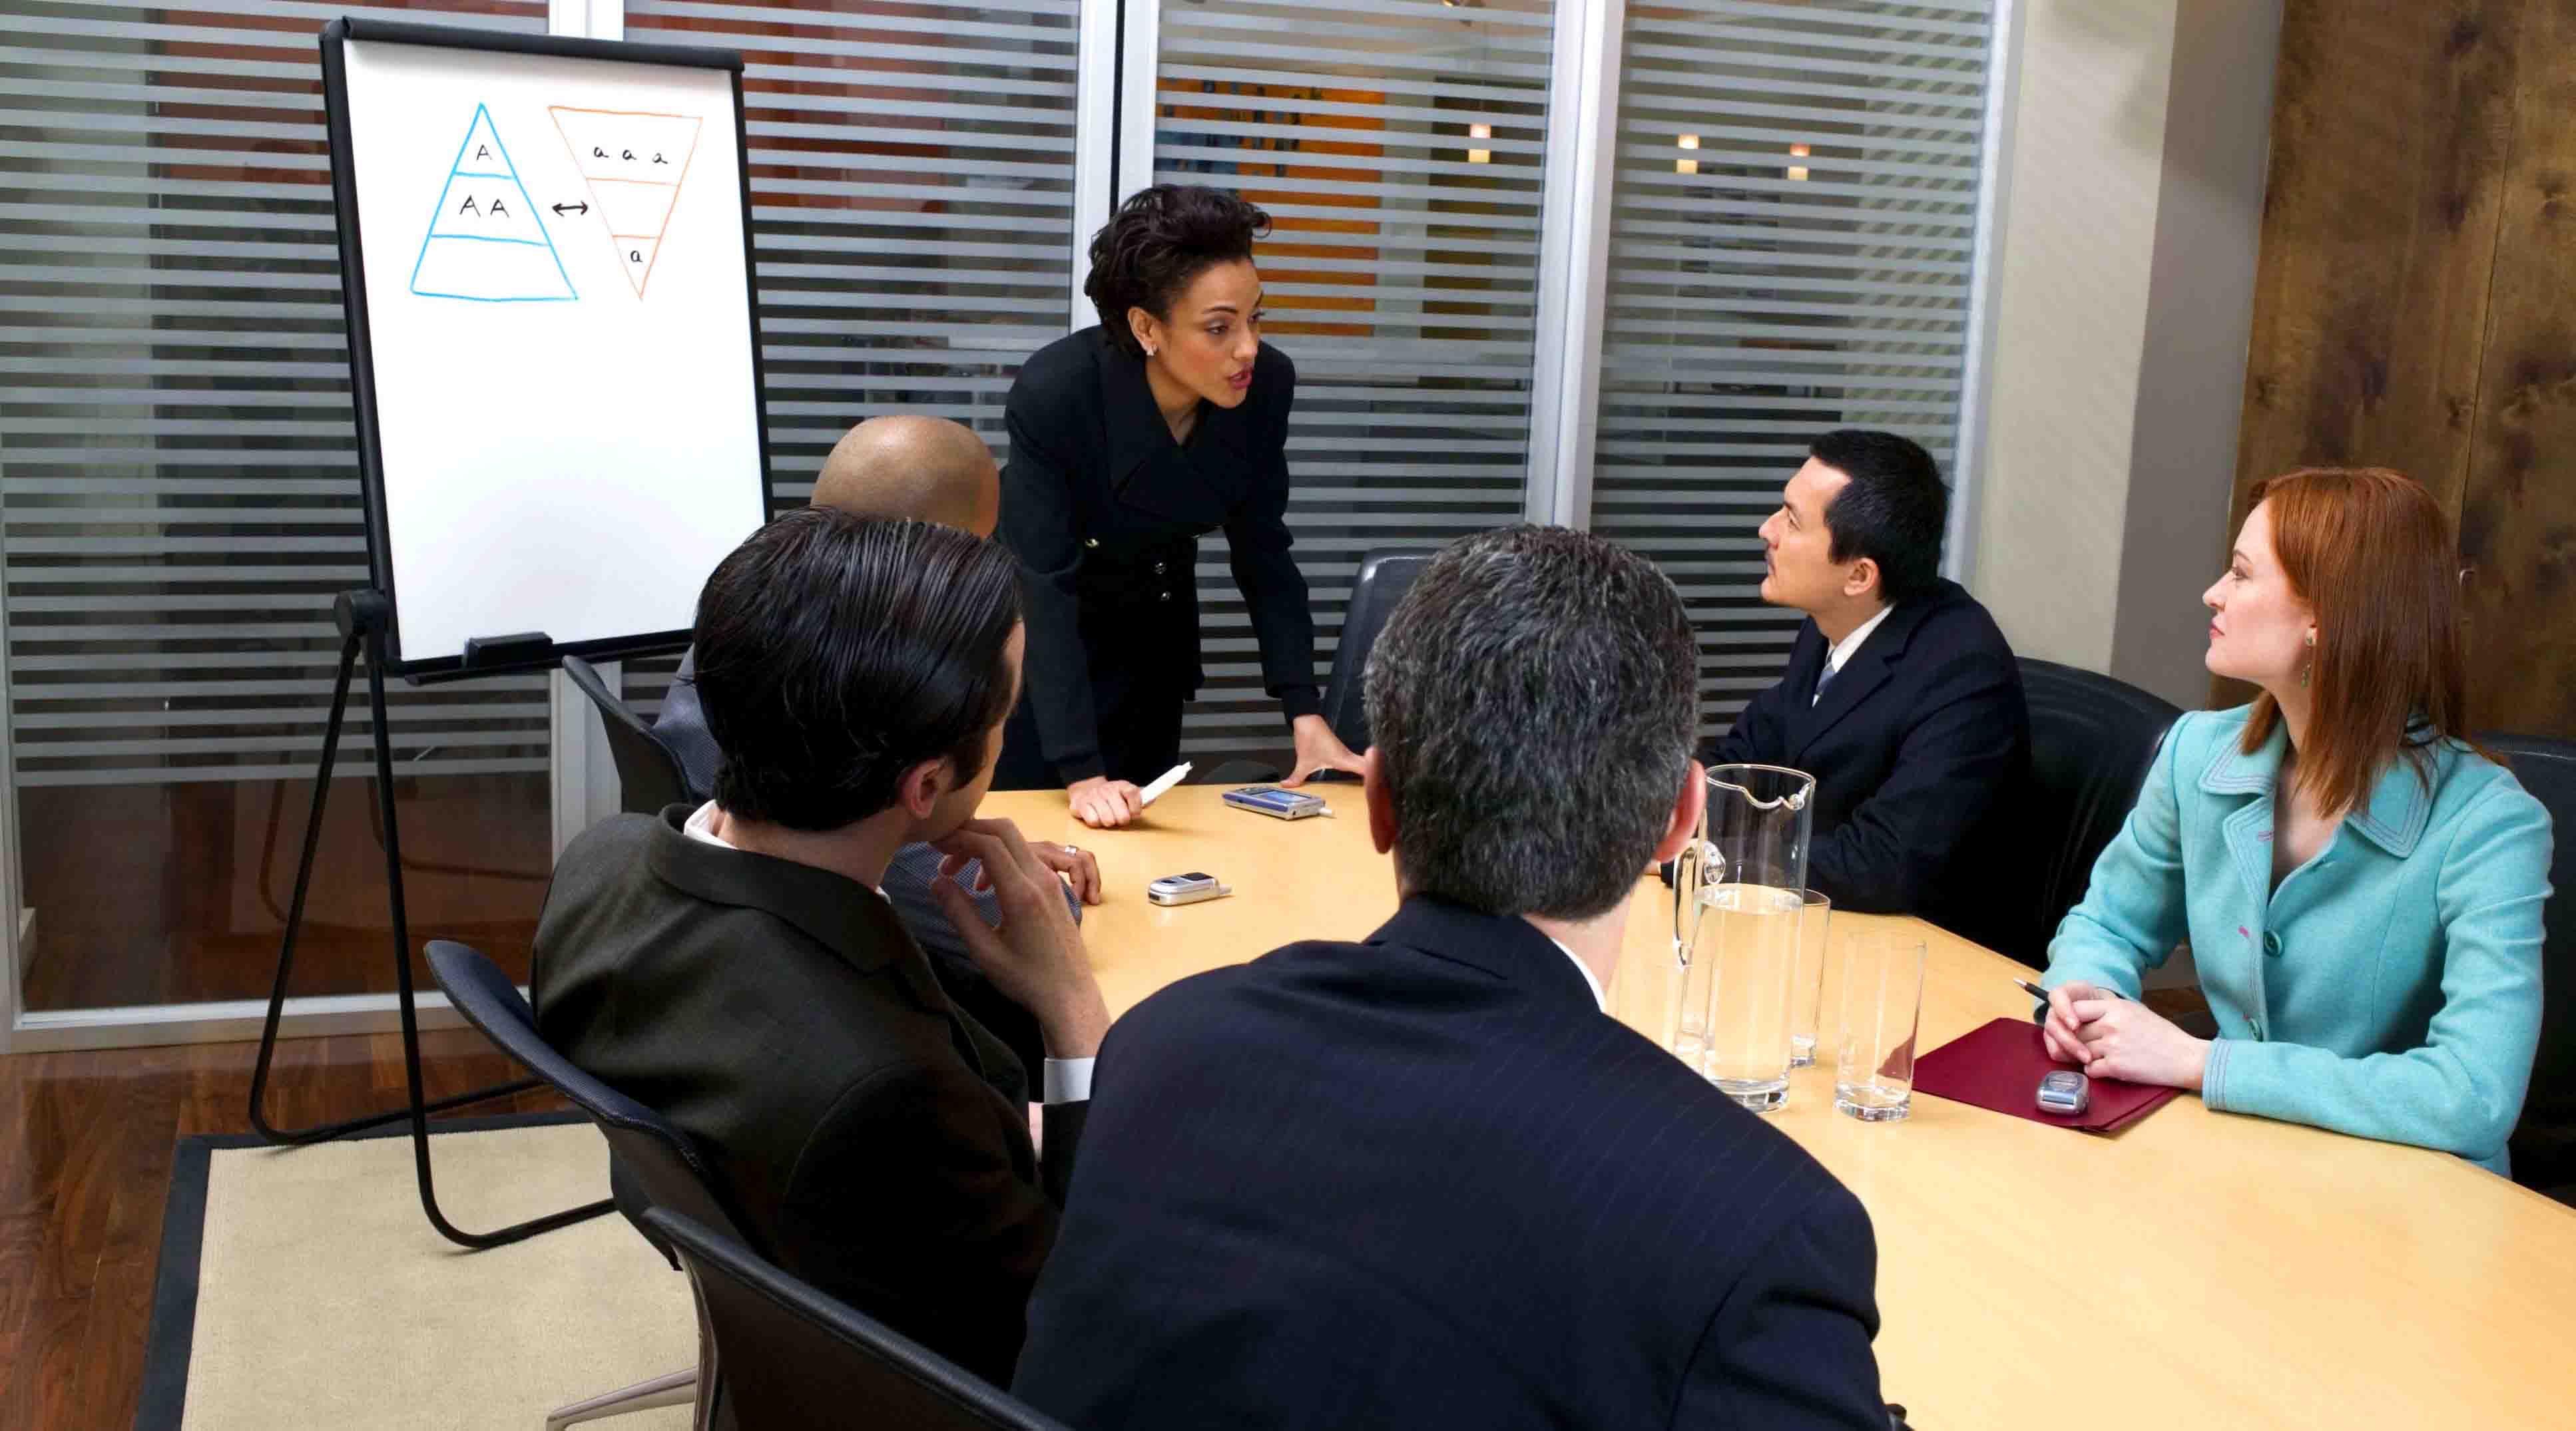 A group of business professionals in a meeting